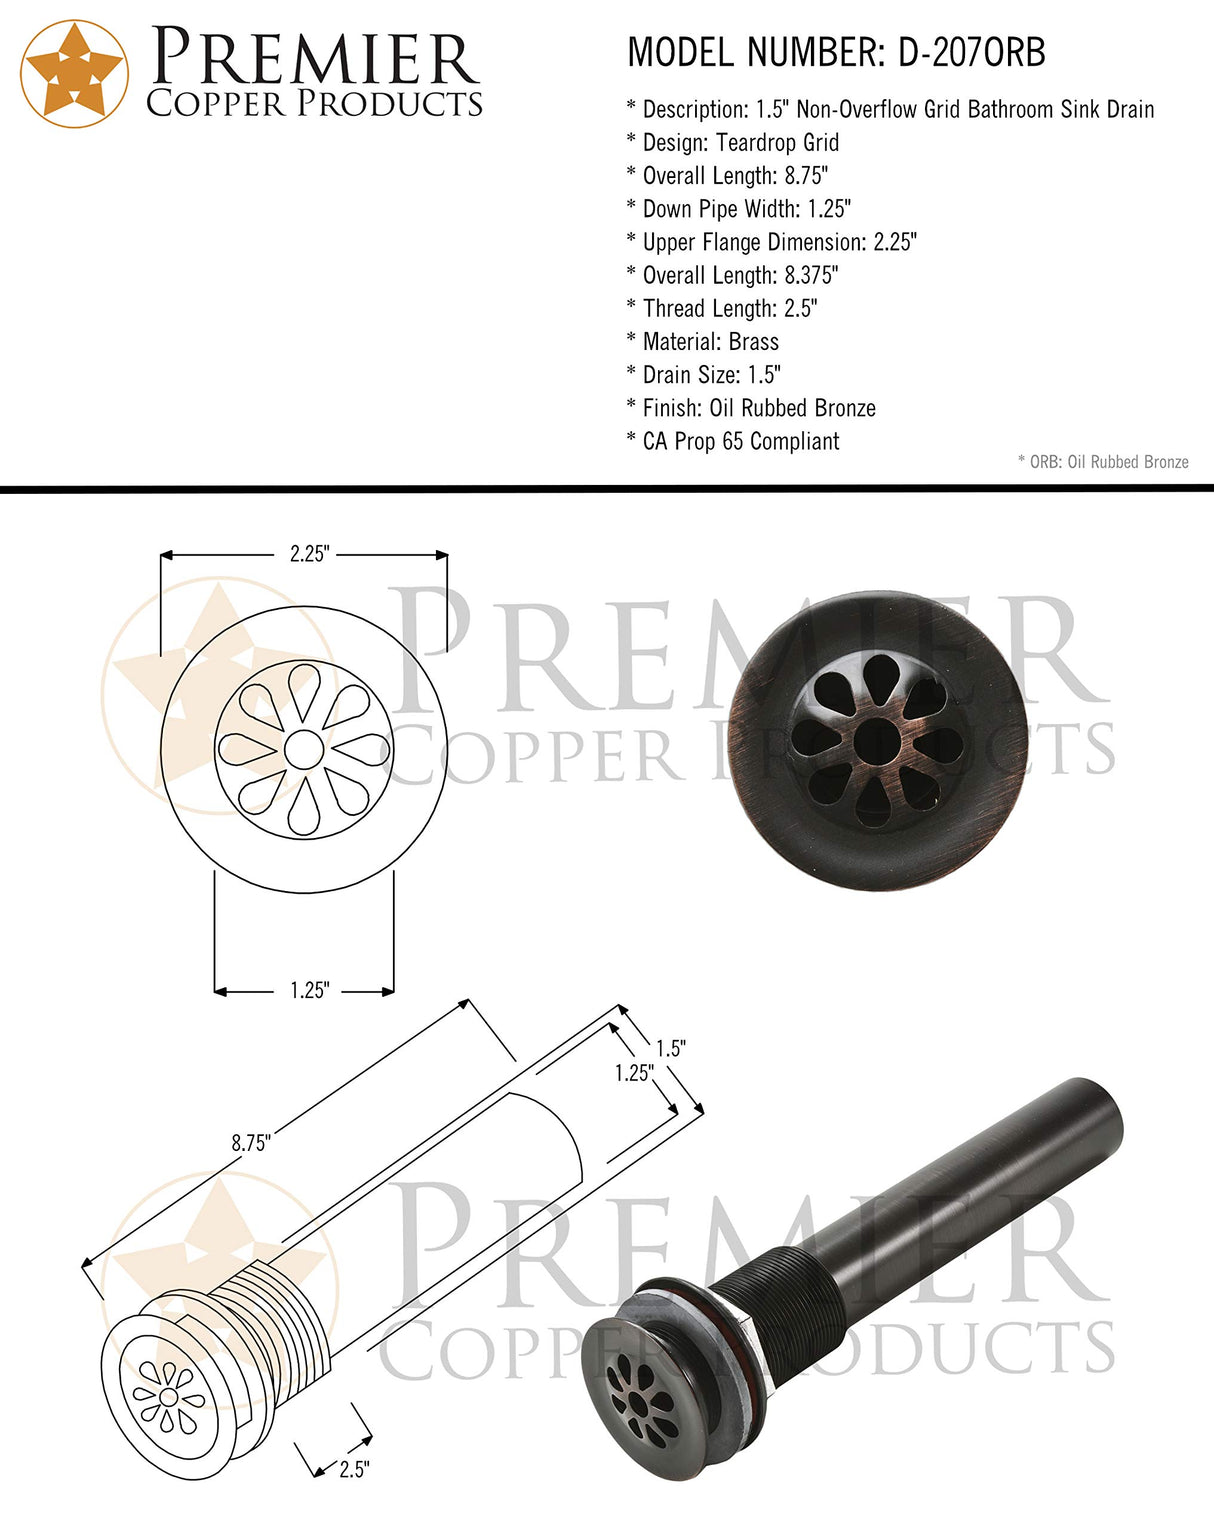 Premier Copper Products D-207ORB 1.5-Inch Non-Overflow Grid Bathroom Sink Drain, Oil Rubbed Bronze